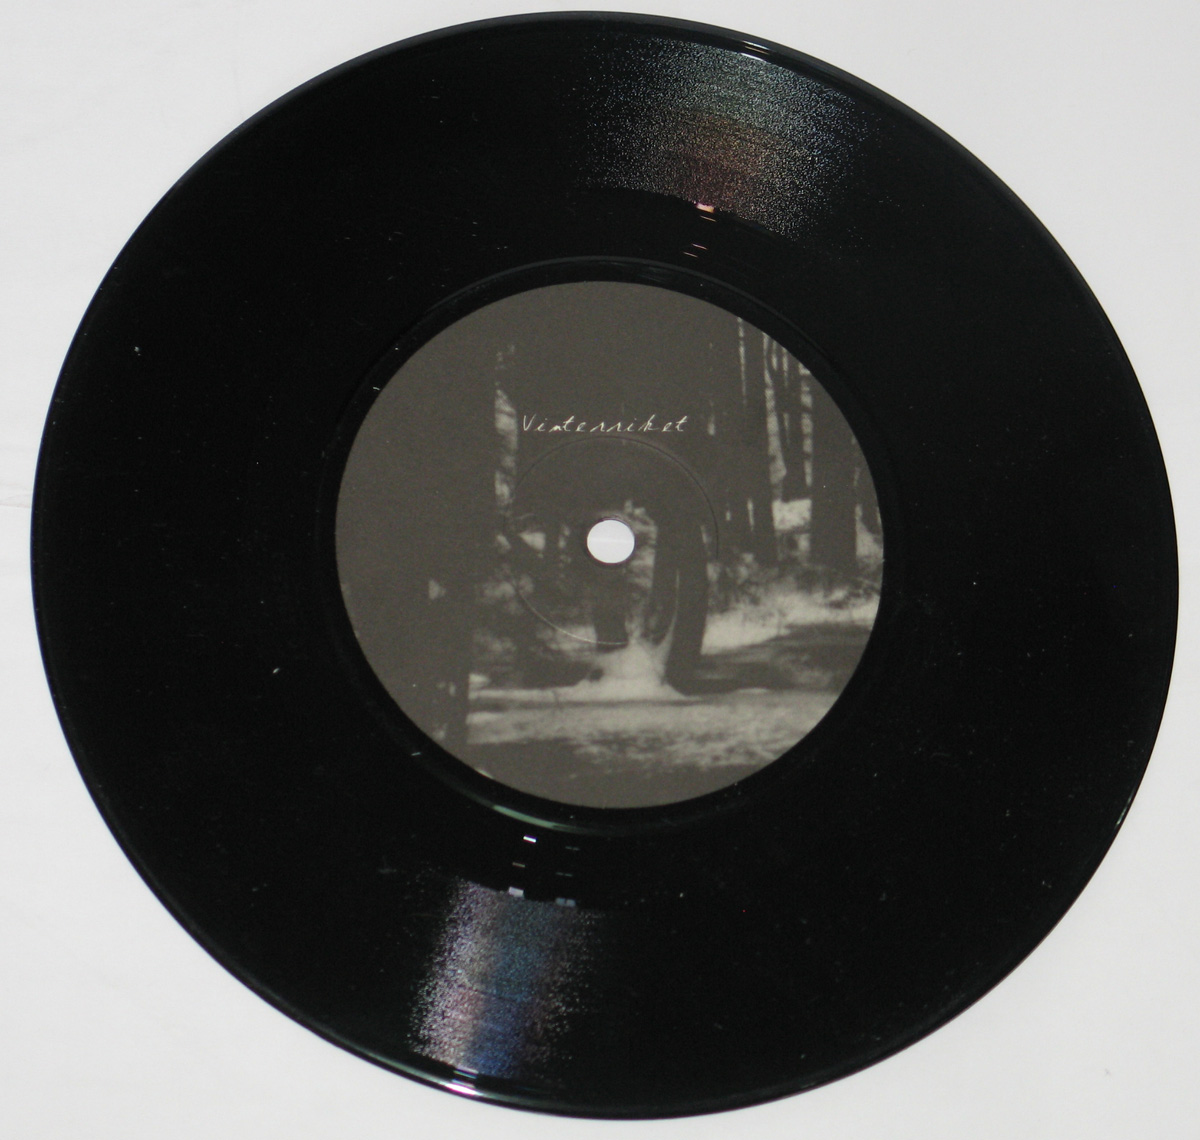 Close up of Side One record's label Vinterriket Veiled allusions Limited Edition handnumbered (###/500) 